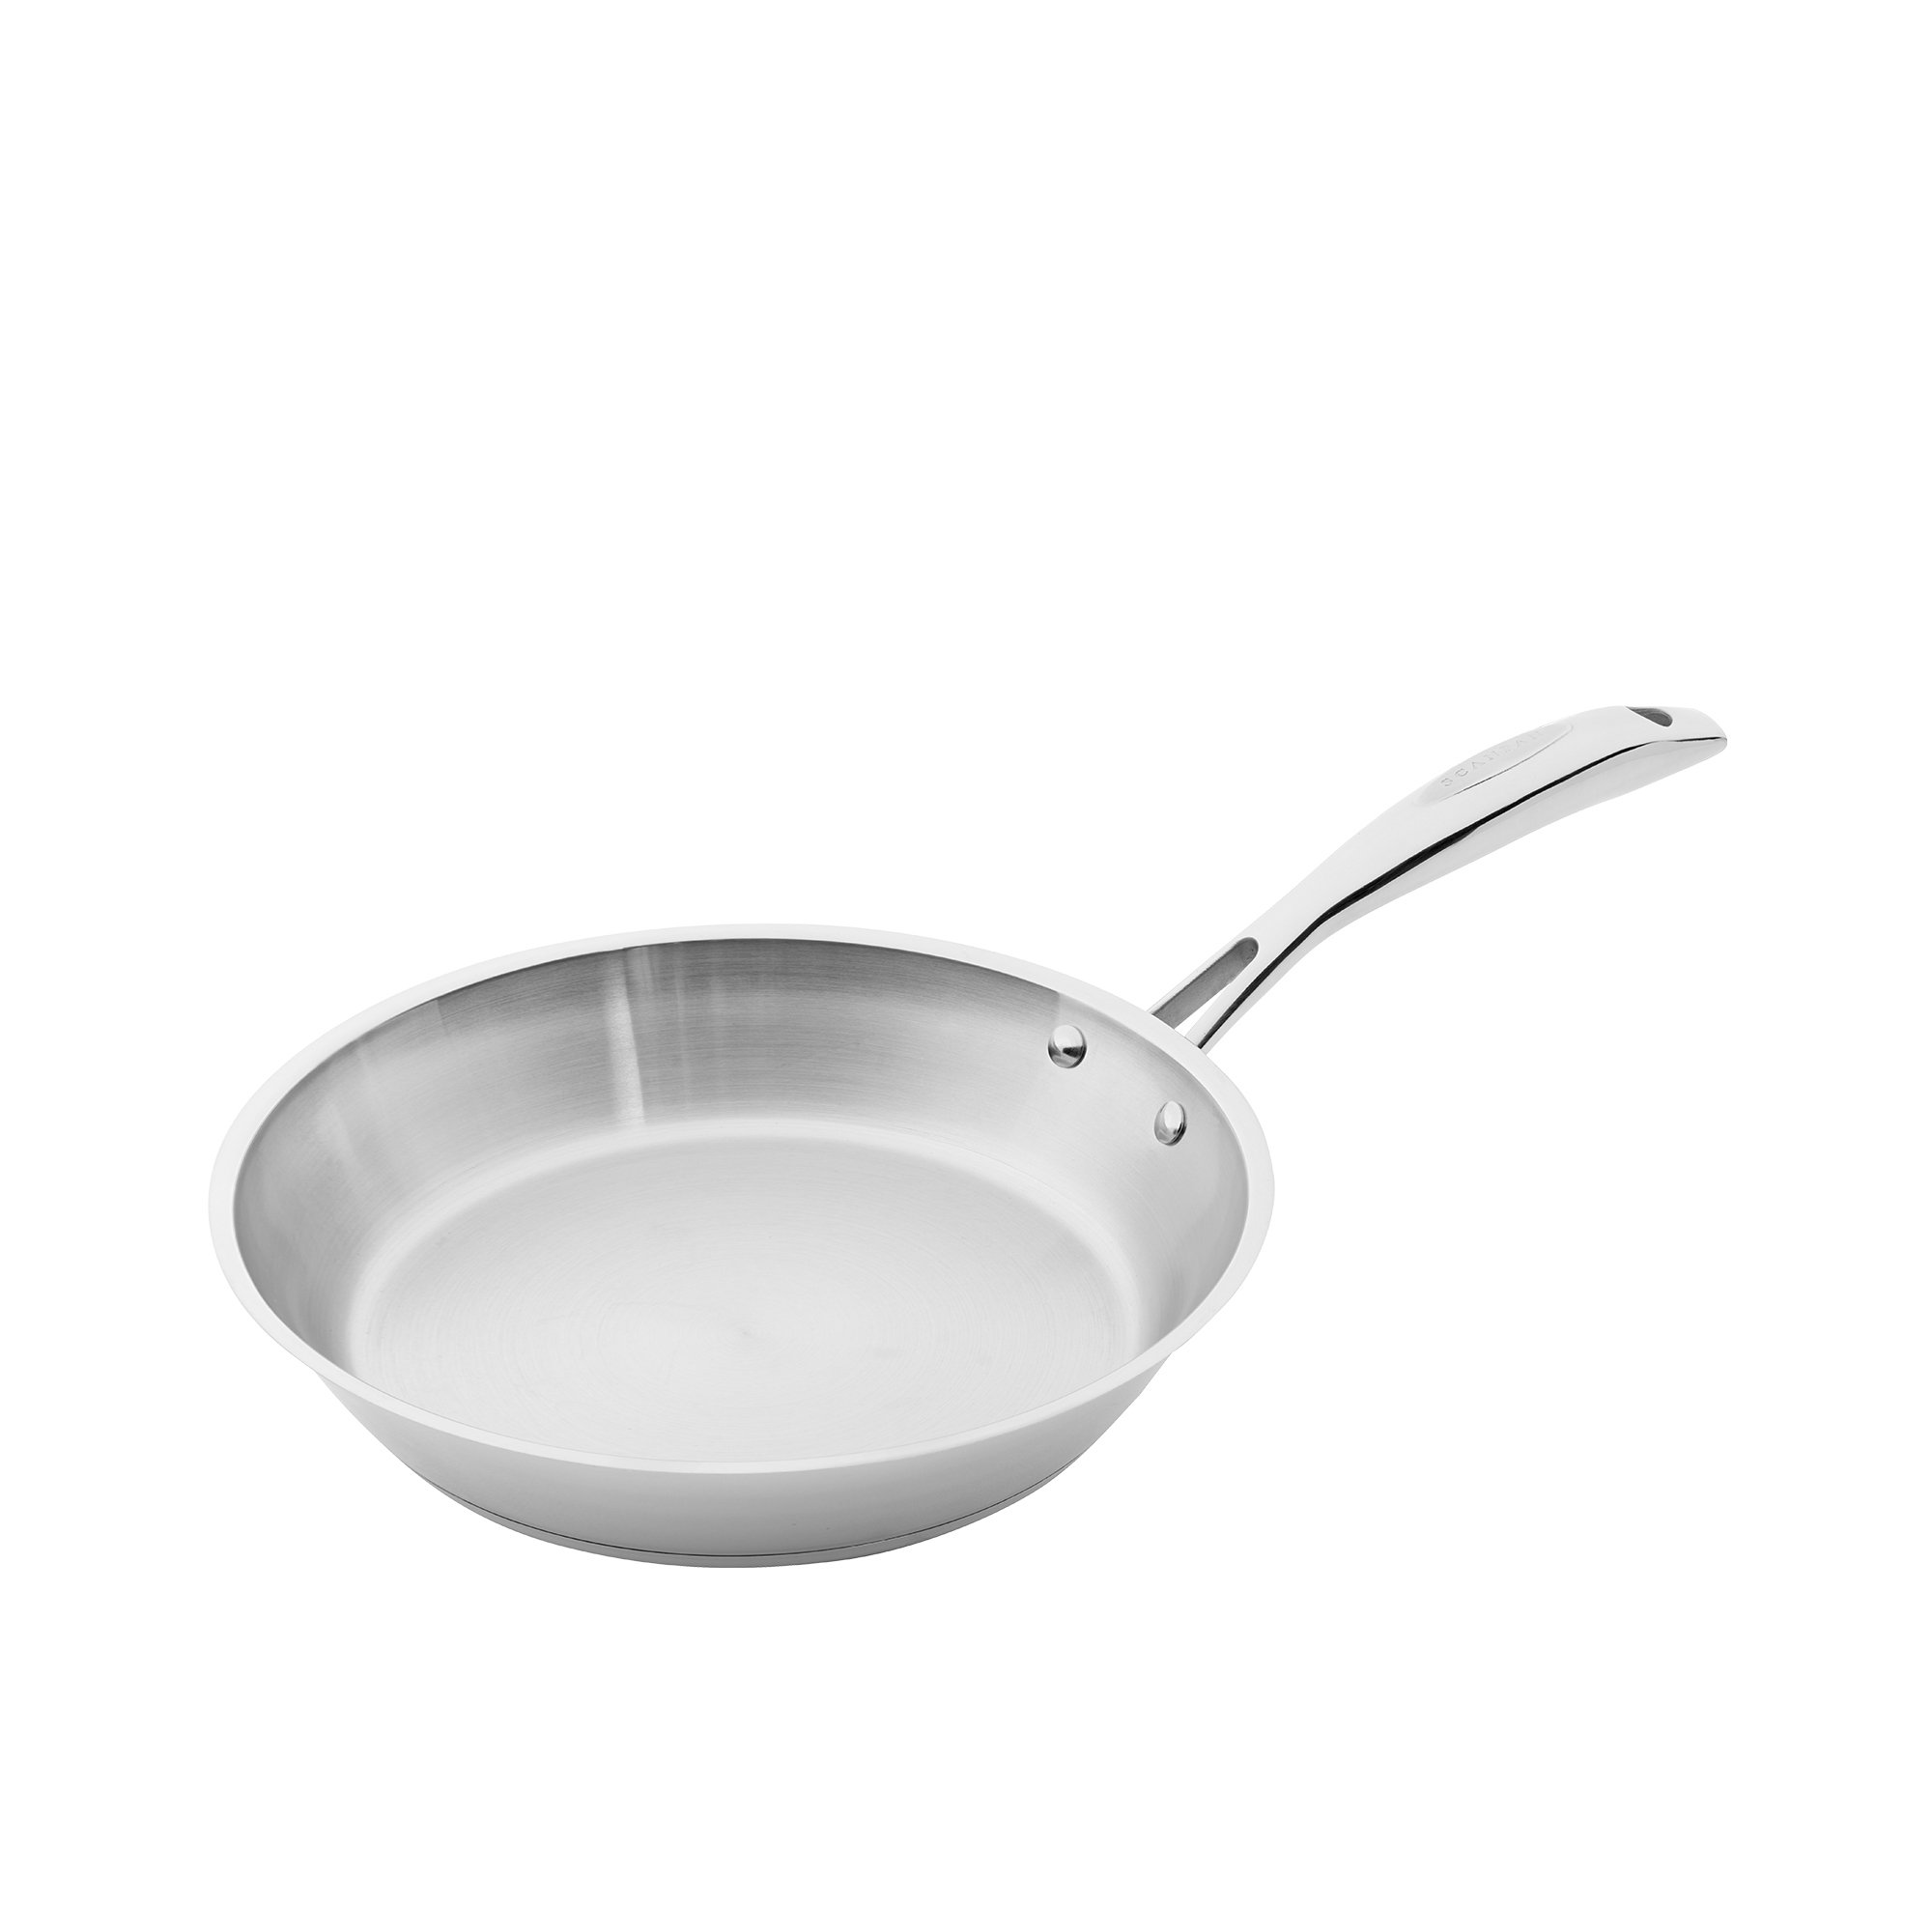 Scanpan STS Stainless Steel Frypan 26cm Image 1